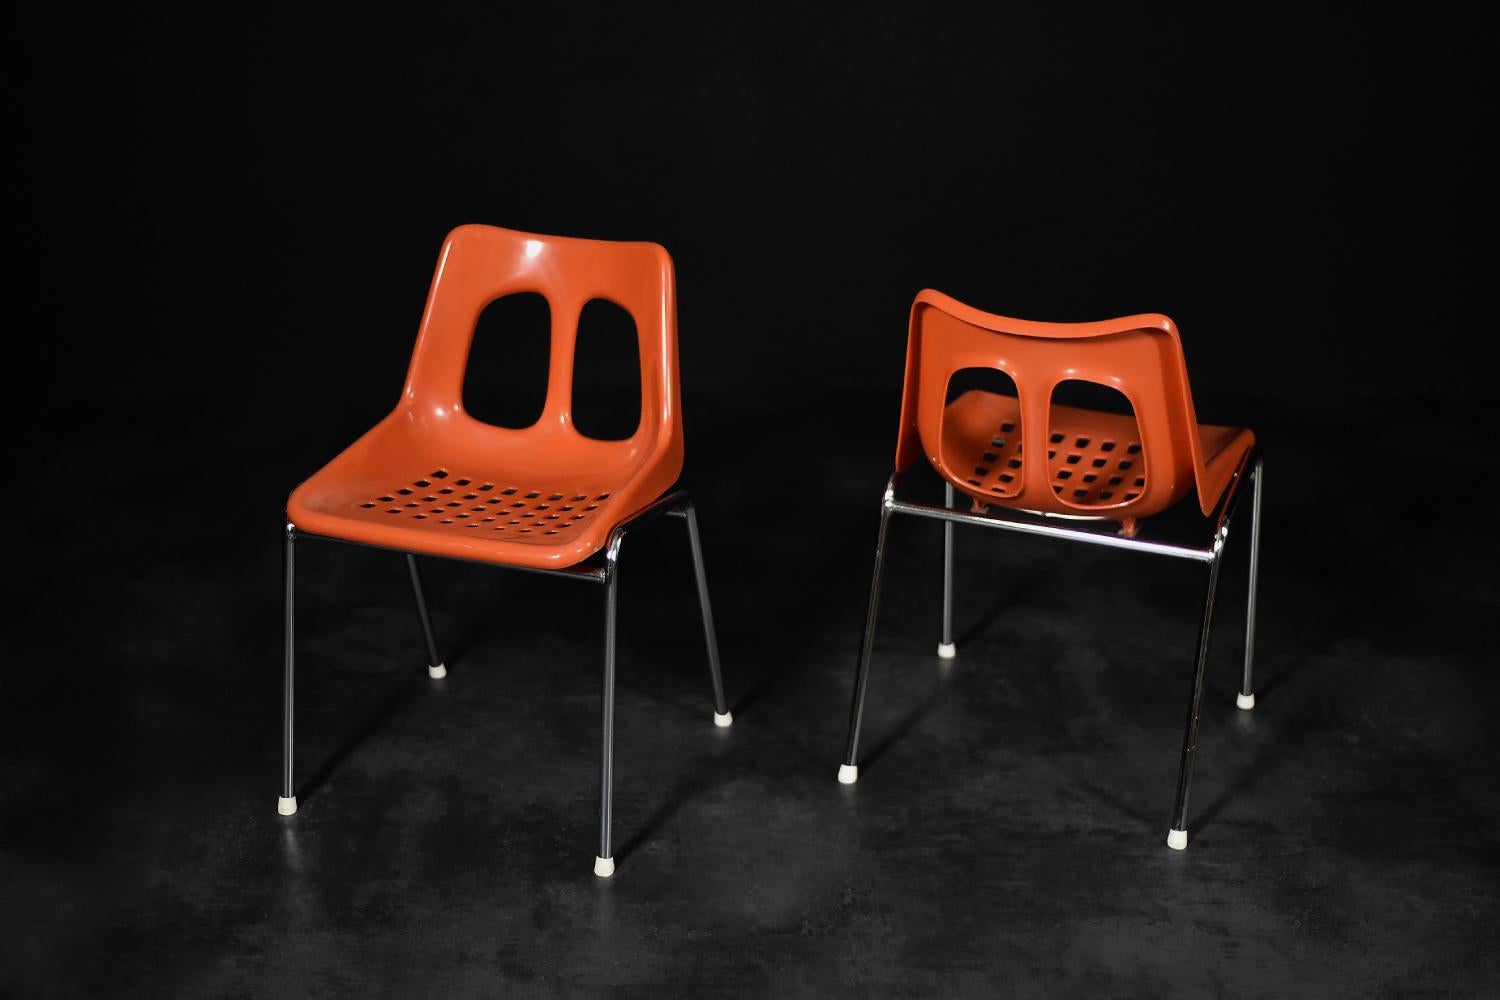 This pair of modernist chairs was produced by the Israeli factory Plasson during the 1960s. The seat and backrest are made of molded orange-red plastic. The slender legs are made of chrome-plated metal. The chairs are very comfortable, their shape